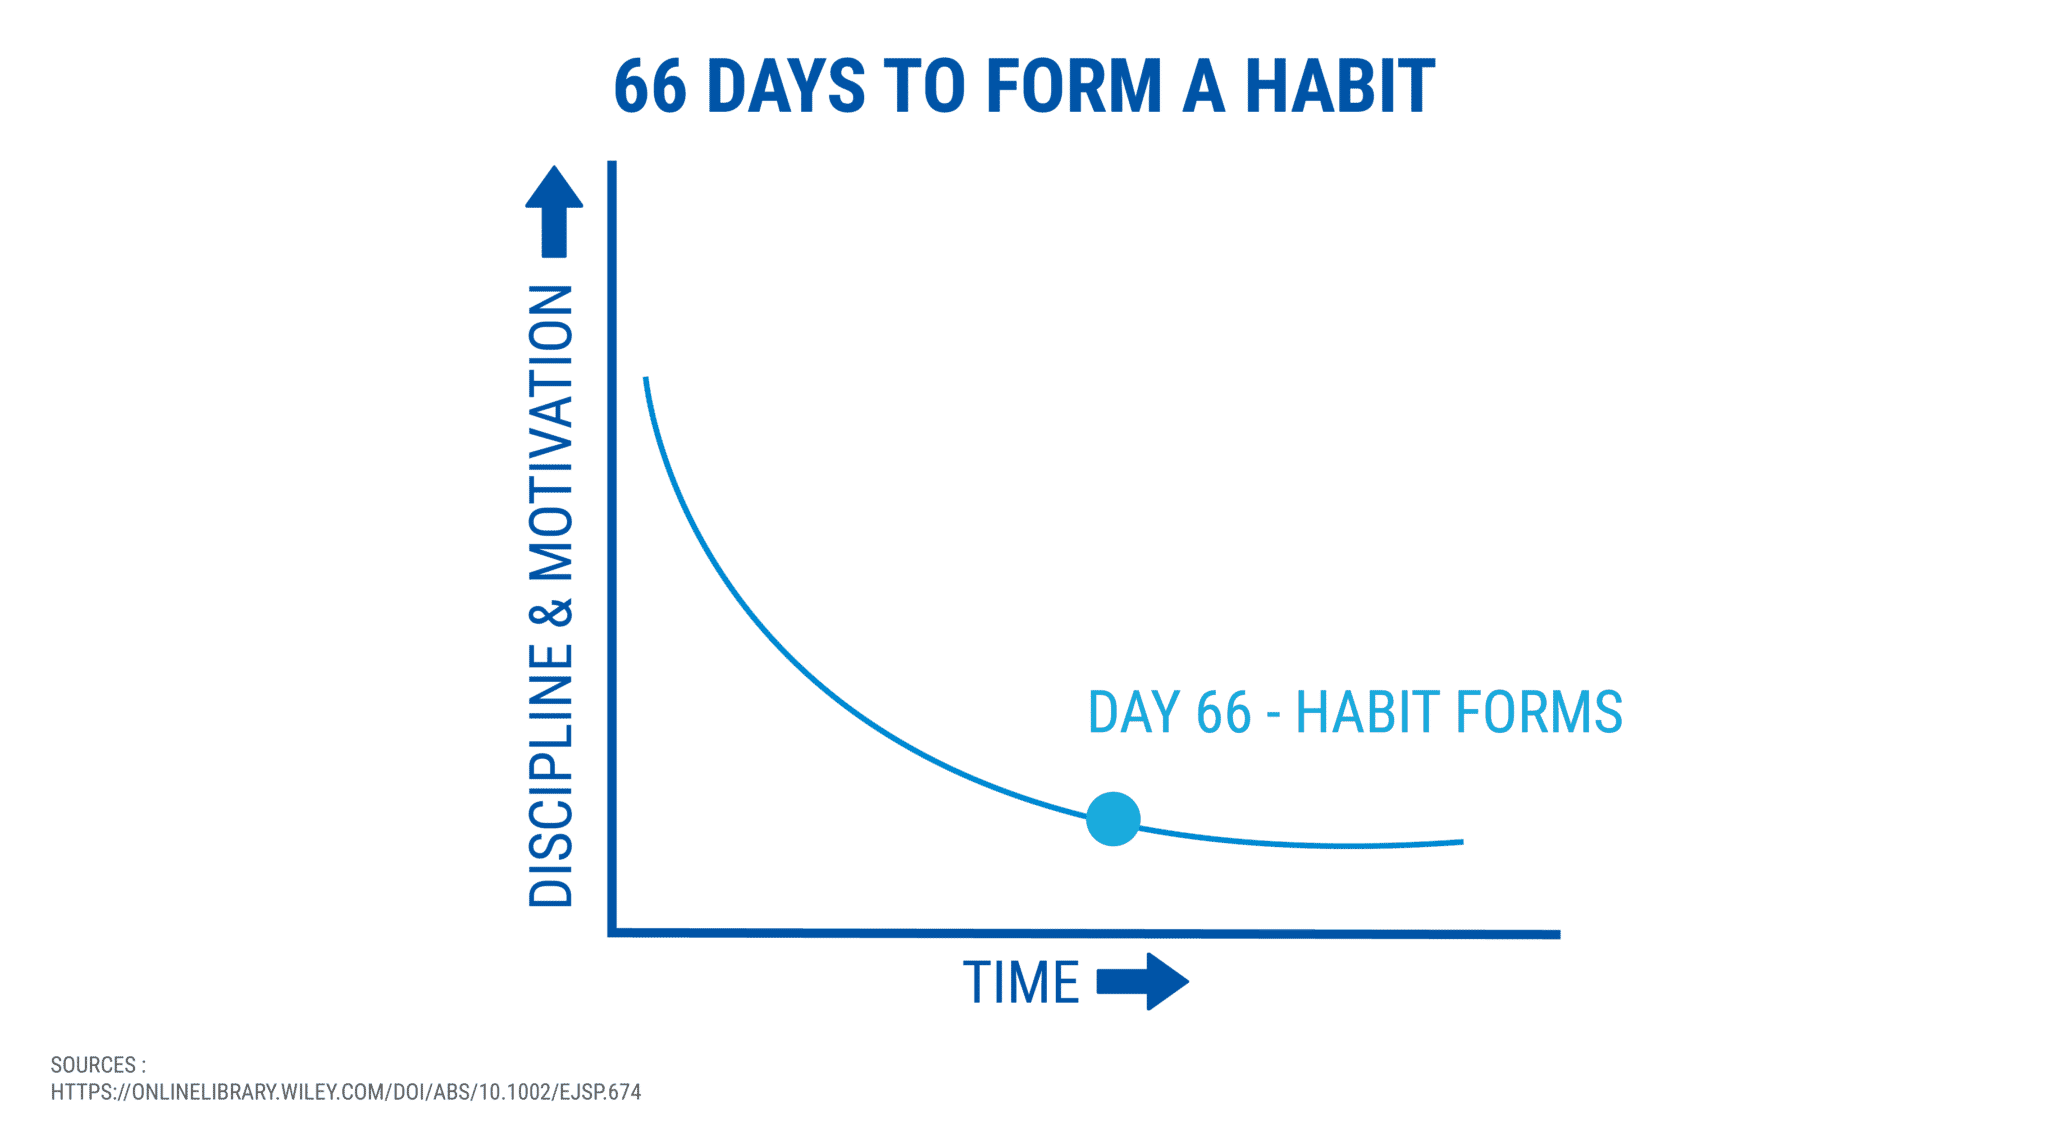 66 DAYS TO FORM A HABIT